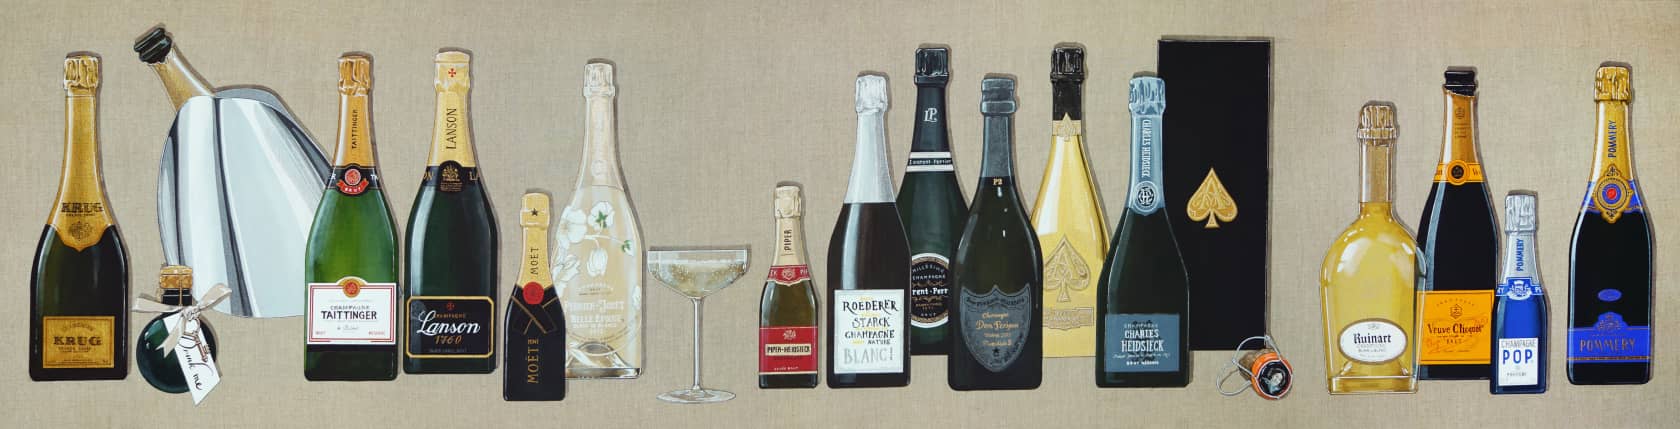 Sooyoung Chung Full of Choice - Champagne Acrylic on linen